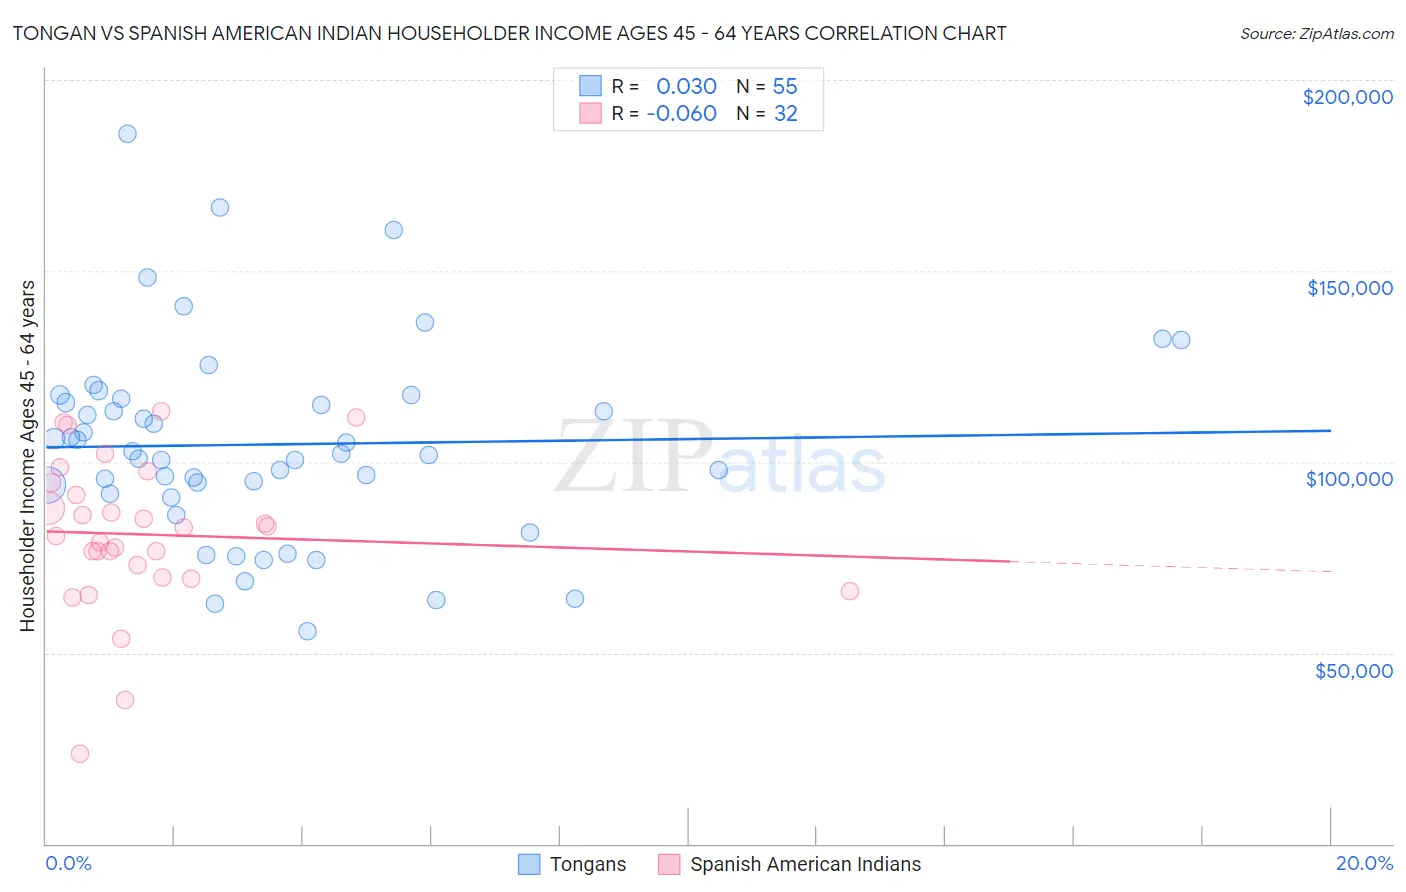 Tongan vs Spanish American Indian Householder Income Ages 45 - 64 years